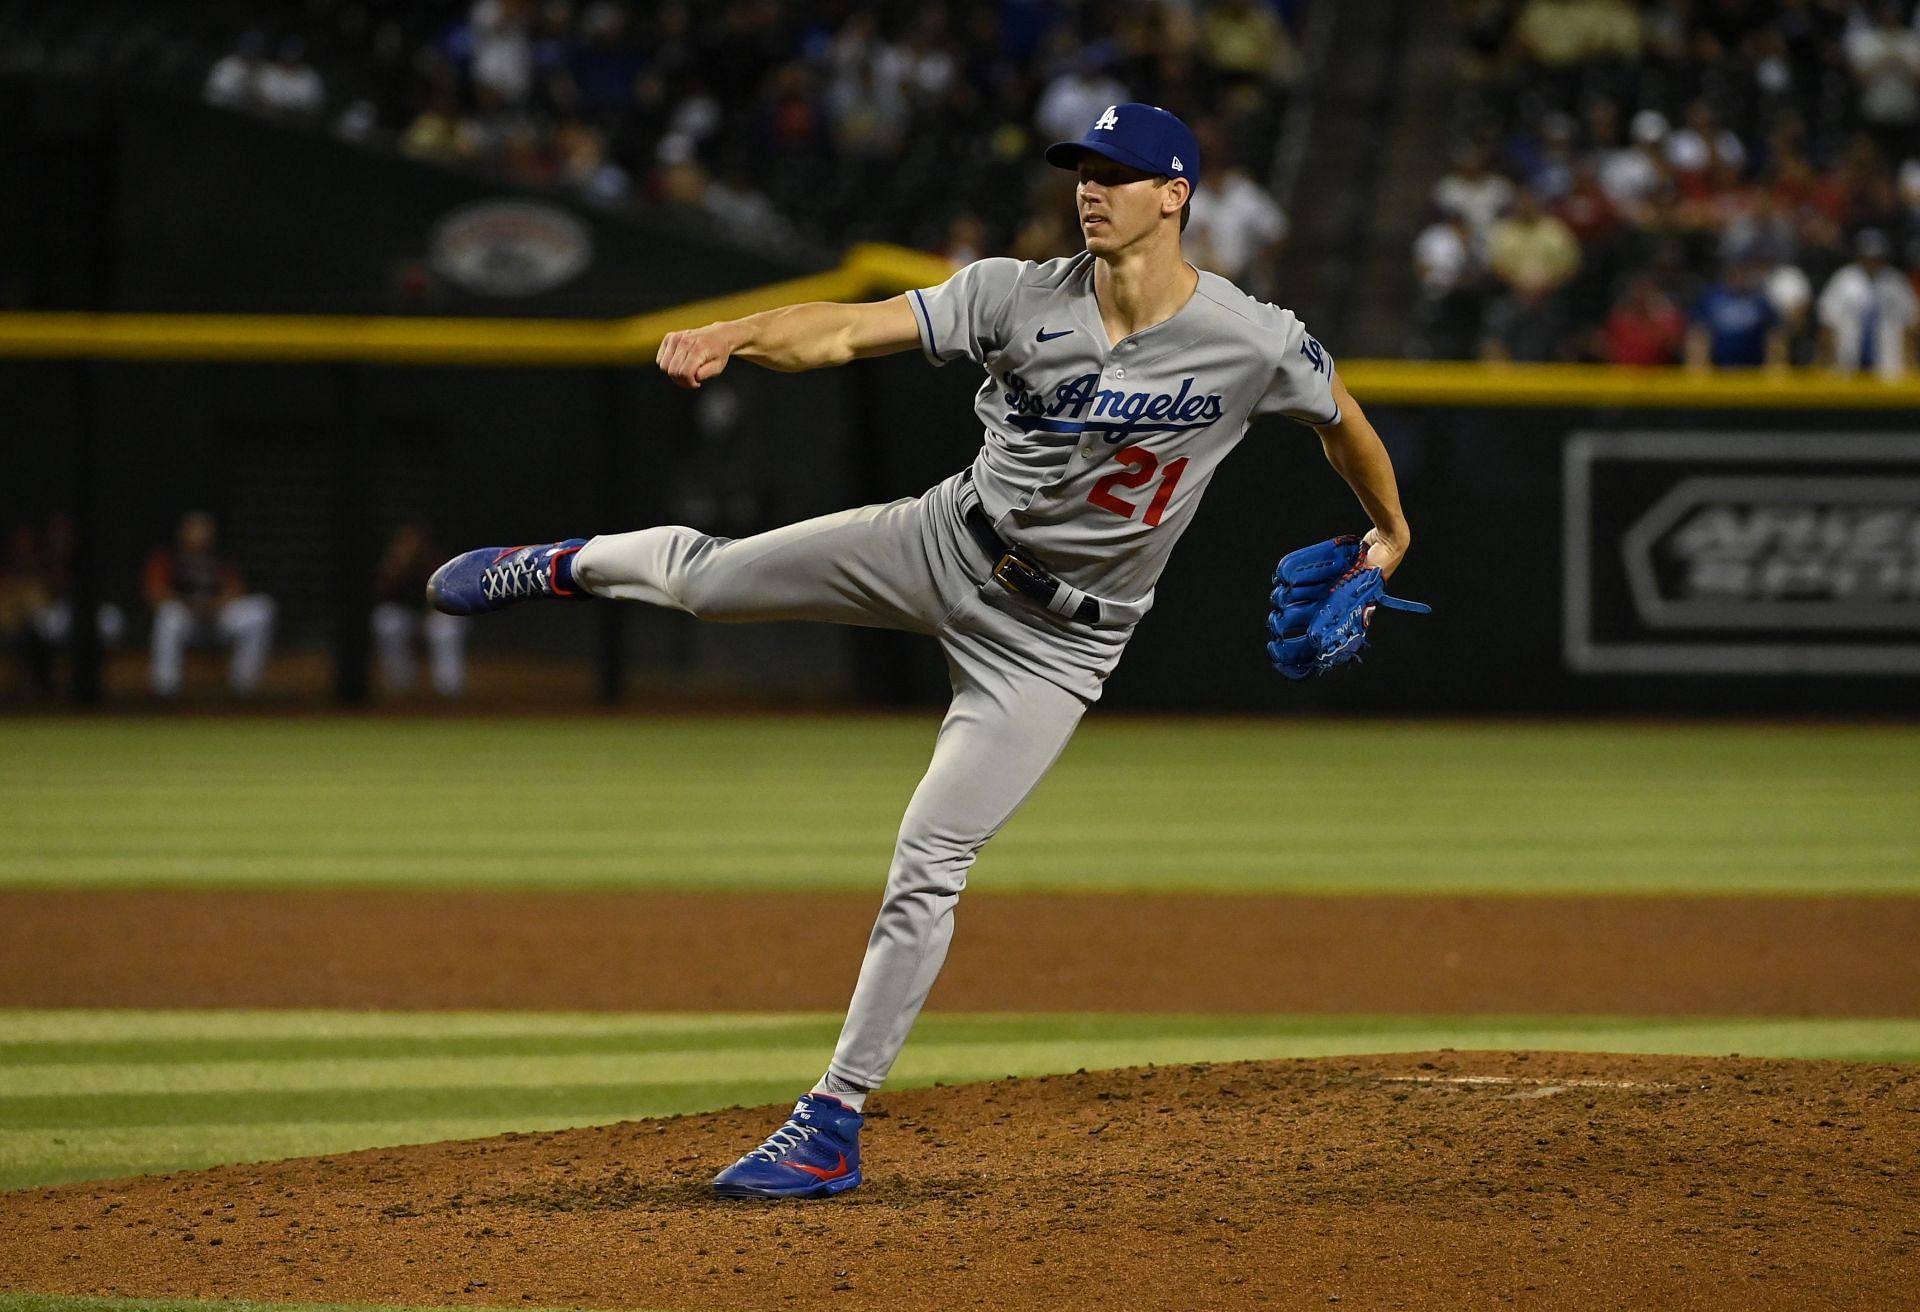 Los Angeles Dodgers starter Walker Buehler had 10 strikeouts in his complete game shutout, the first in the league this season.